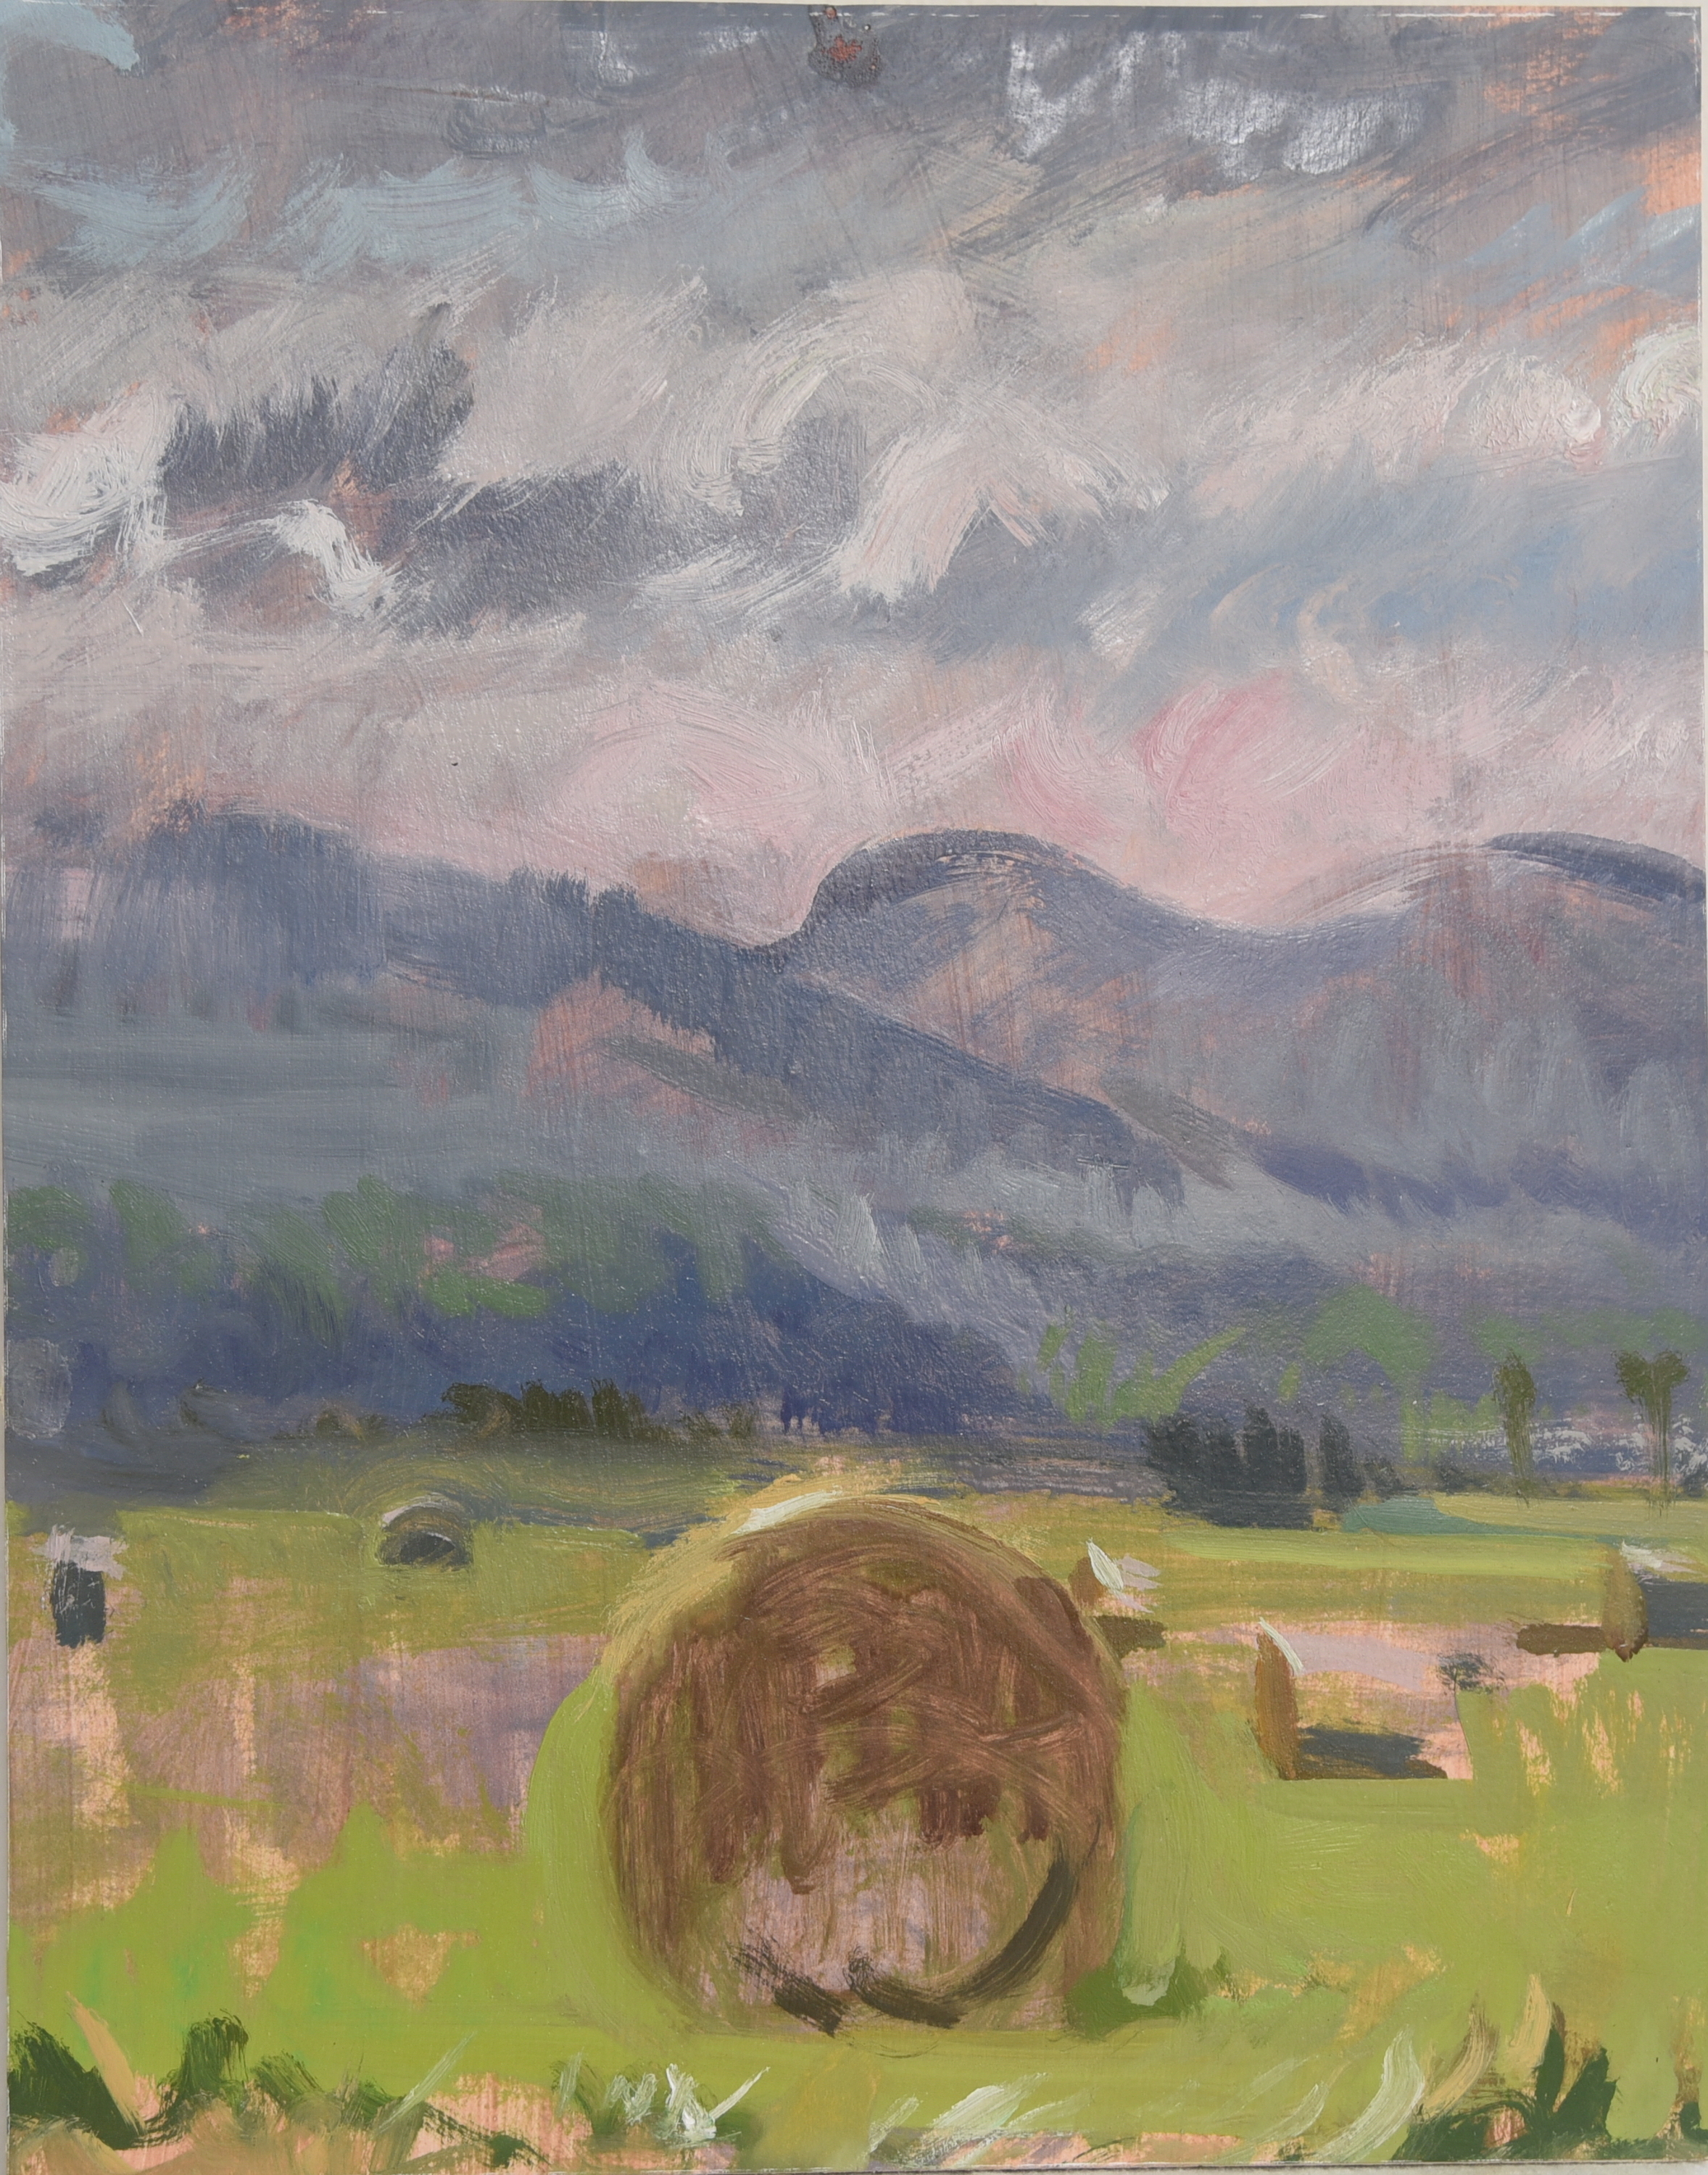 A bale . oil on paper panel. 11 22x14 22 ic0vmf